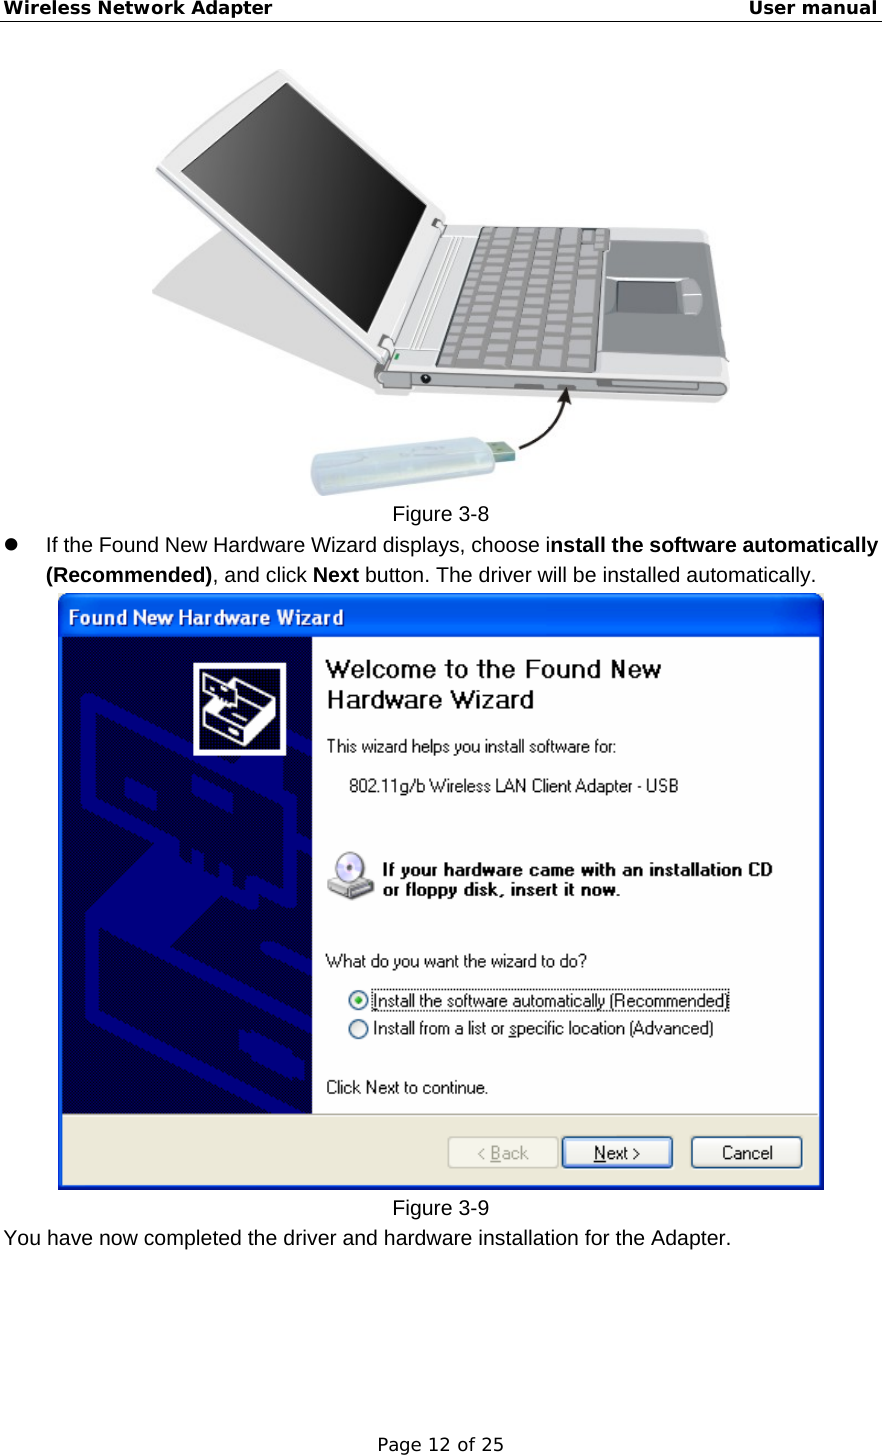 Wireless Network Adapter                                                    User manual Page 12 of 25  Figure 3-8 z  If the Found New Hardware Wizard displays, choose install the software automatically (Recommended), and click Next button. The driver will be installed automatically.  Figure 3-9 You have now completed the driver and hardware installation for the Adapter. 